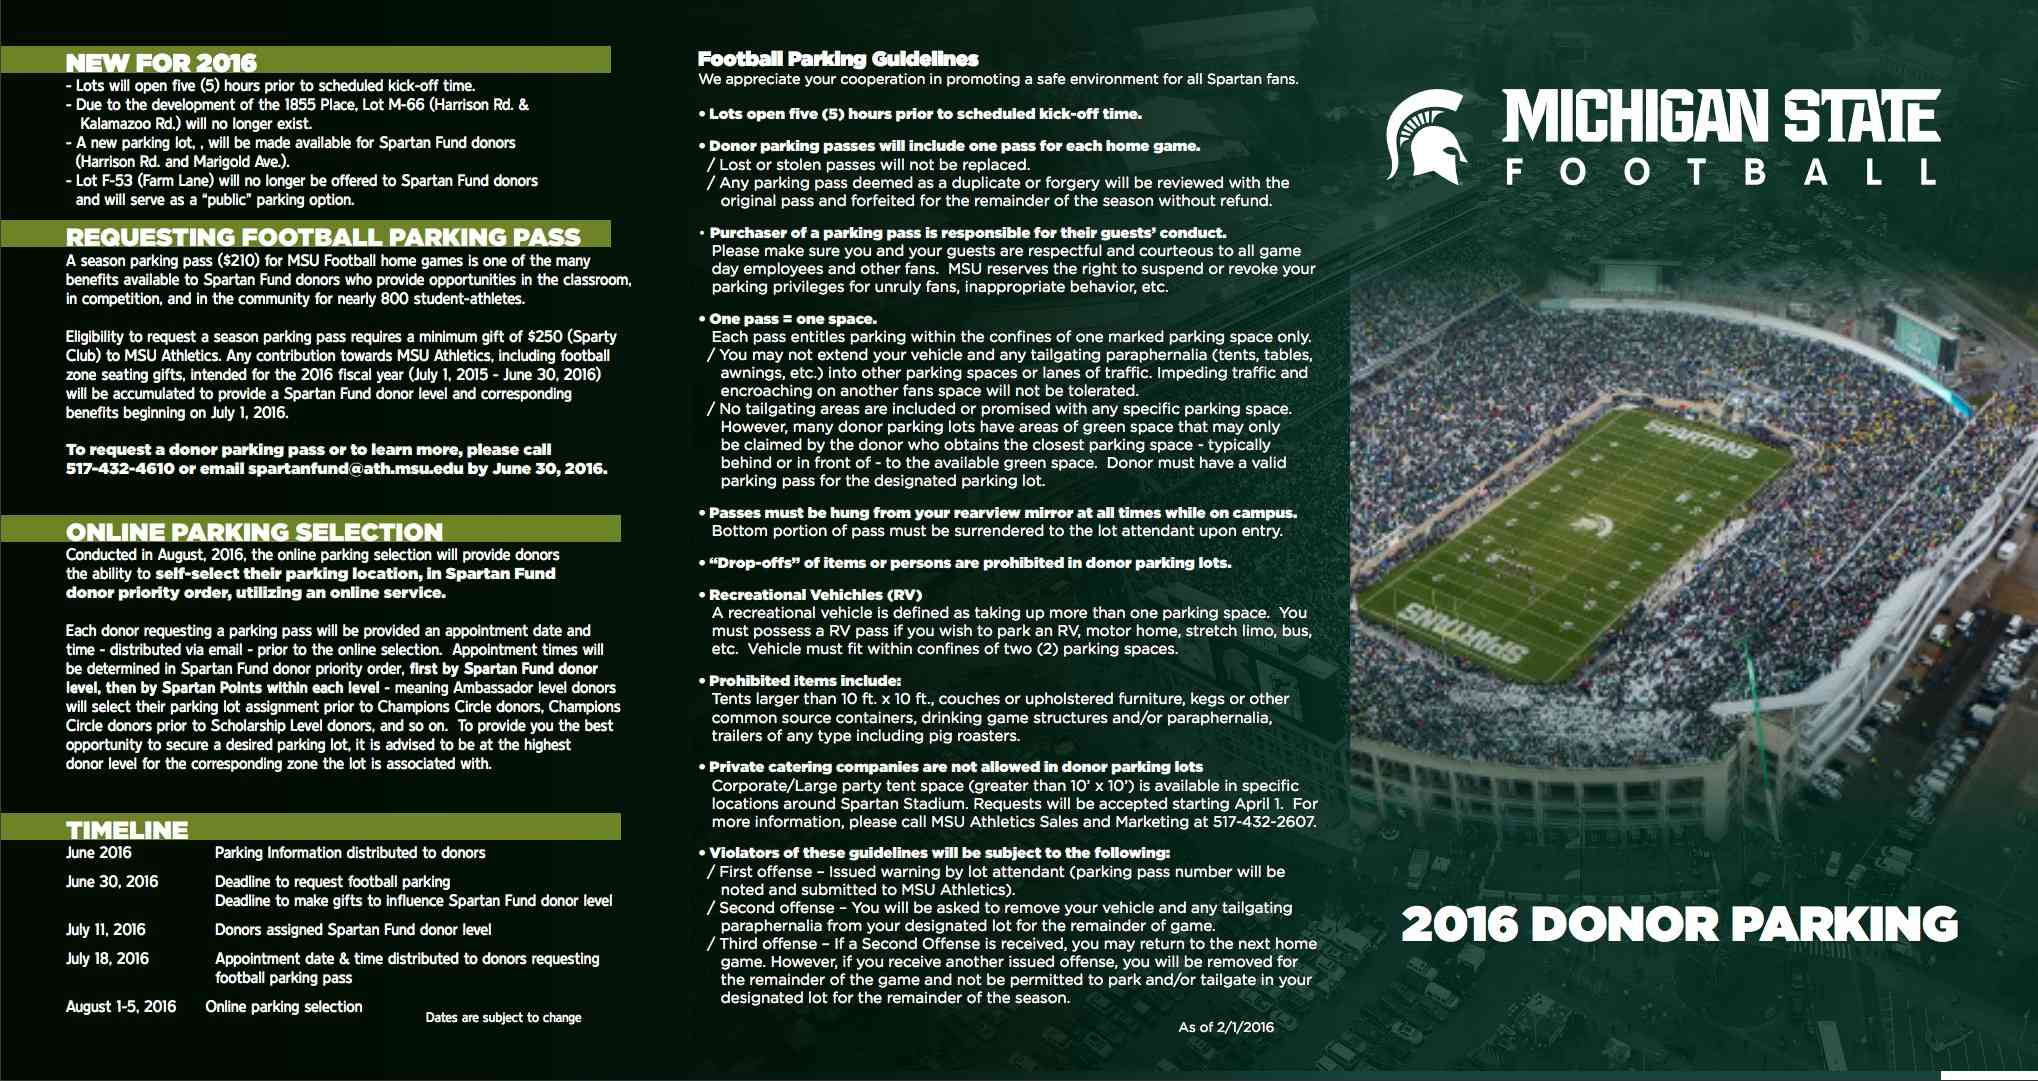 MSU tailgate document up and vanished from the interwebs... Sparta11